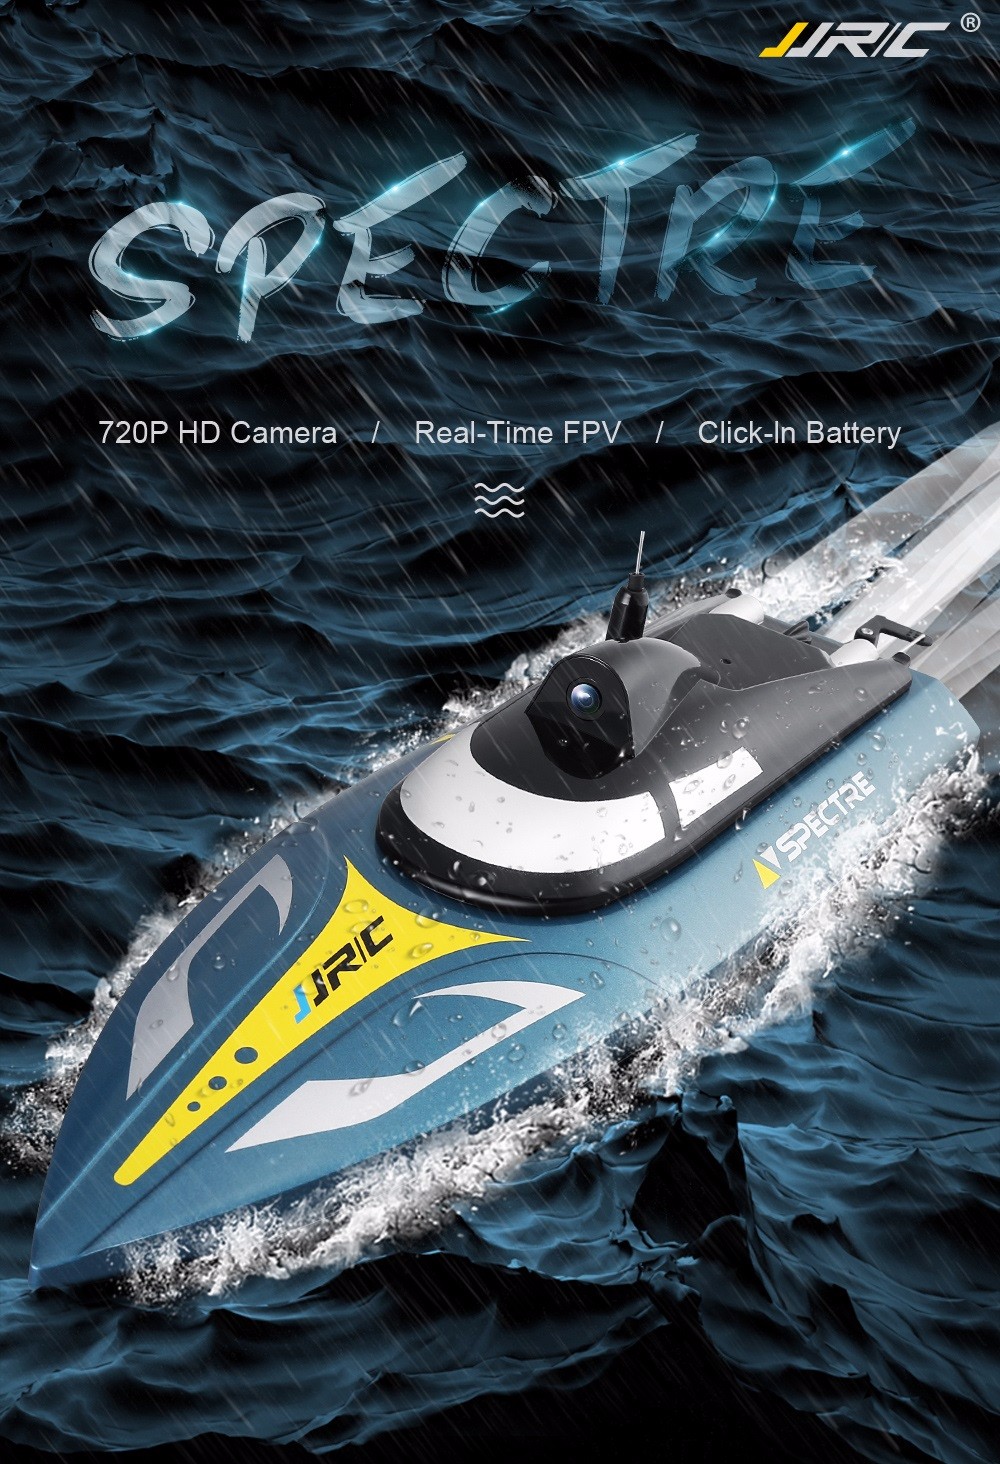 JJRC S4 Spectre Waterproof WiFi FPV RC Boat Support VR 720P HD Camera 20 - 25km/h Capsize Recovery